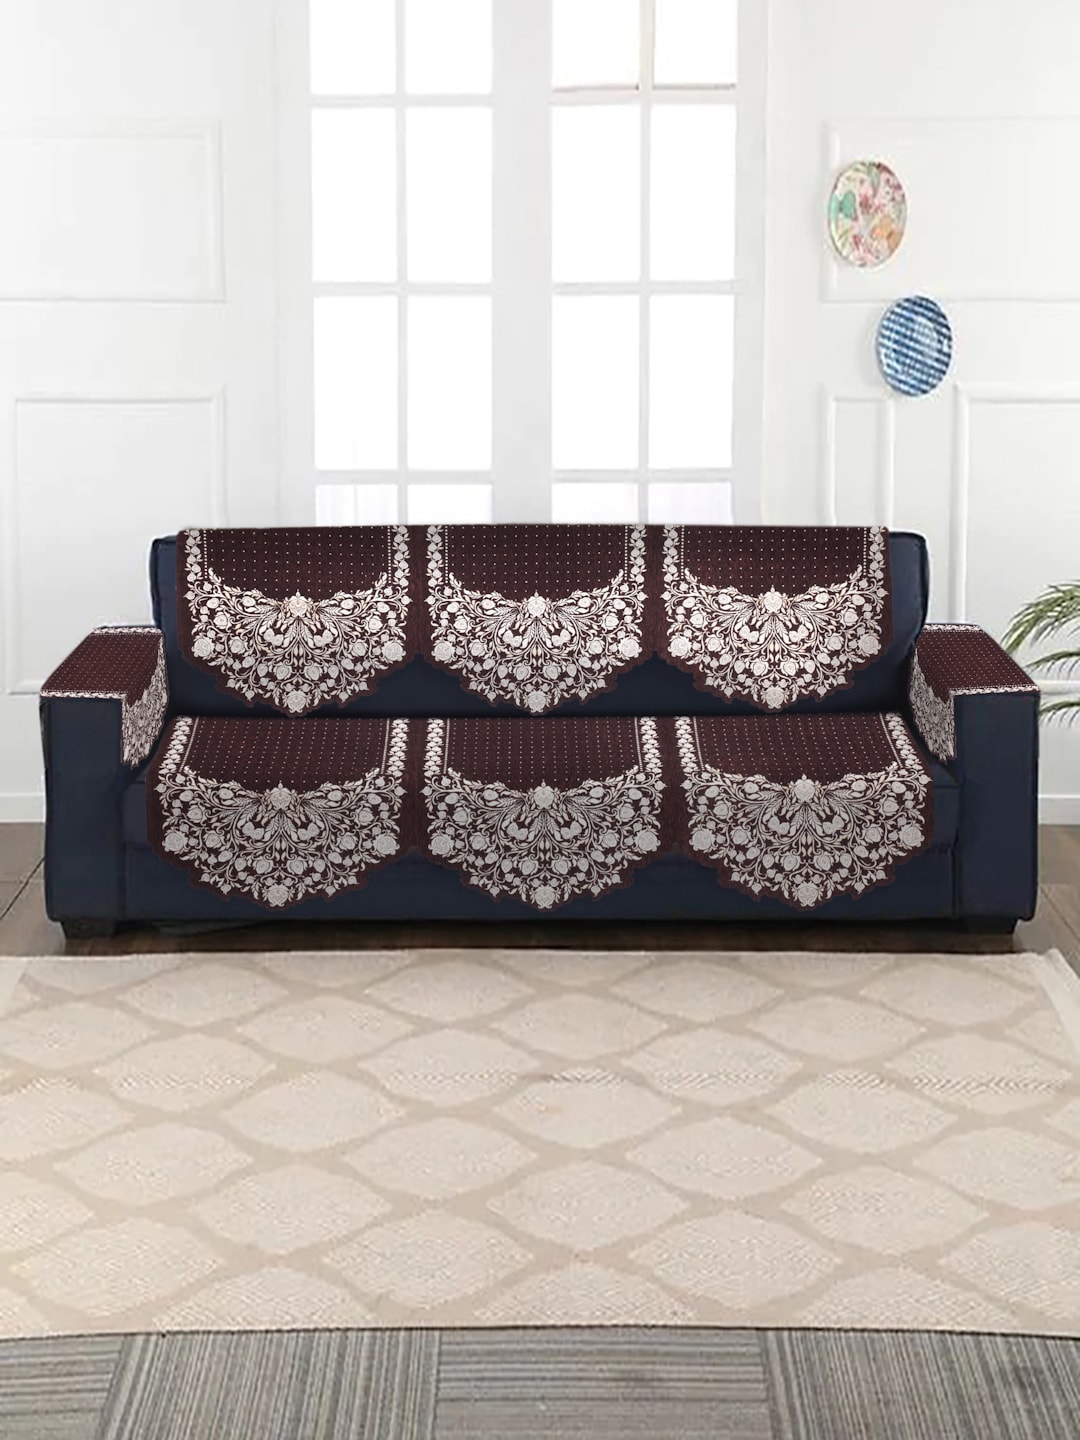 HOSTA HOMES Set of 16 Coffee Brown Jacquard Velvet 5 Seater Sofa Cover With Arm Rest Price in India